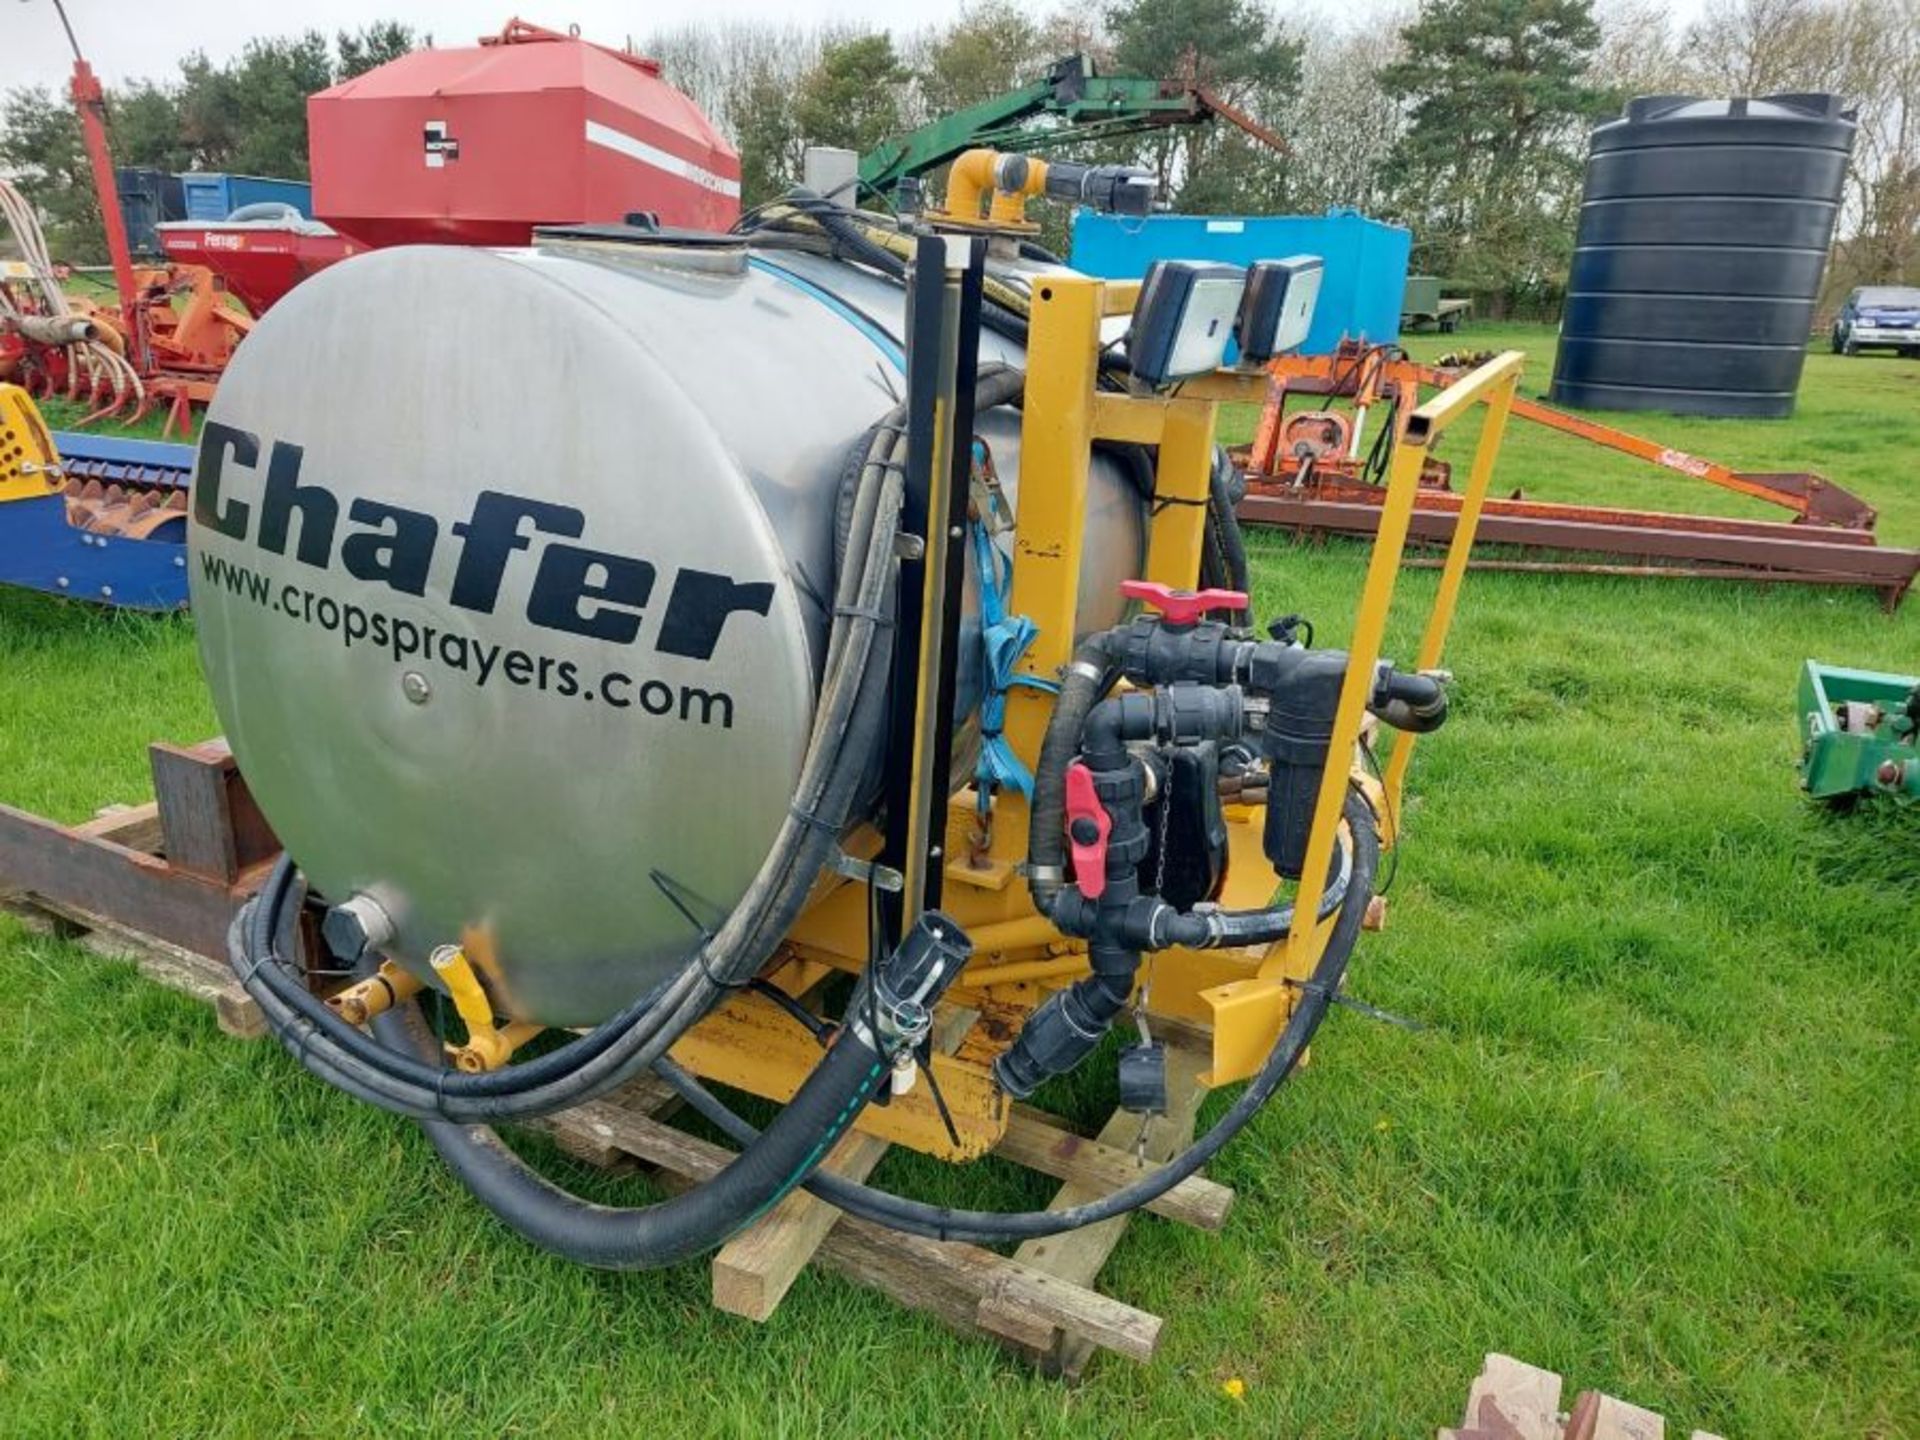 Chafer 1,000 Ltr Stainless steel tank with Hypro pump Teejet 844E rate controller with flow rate